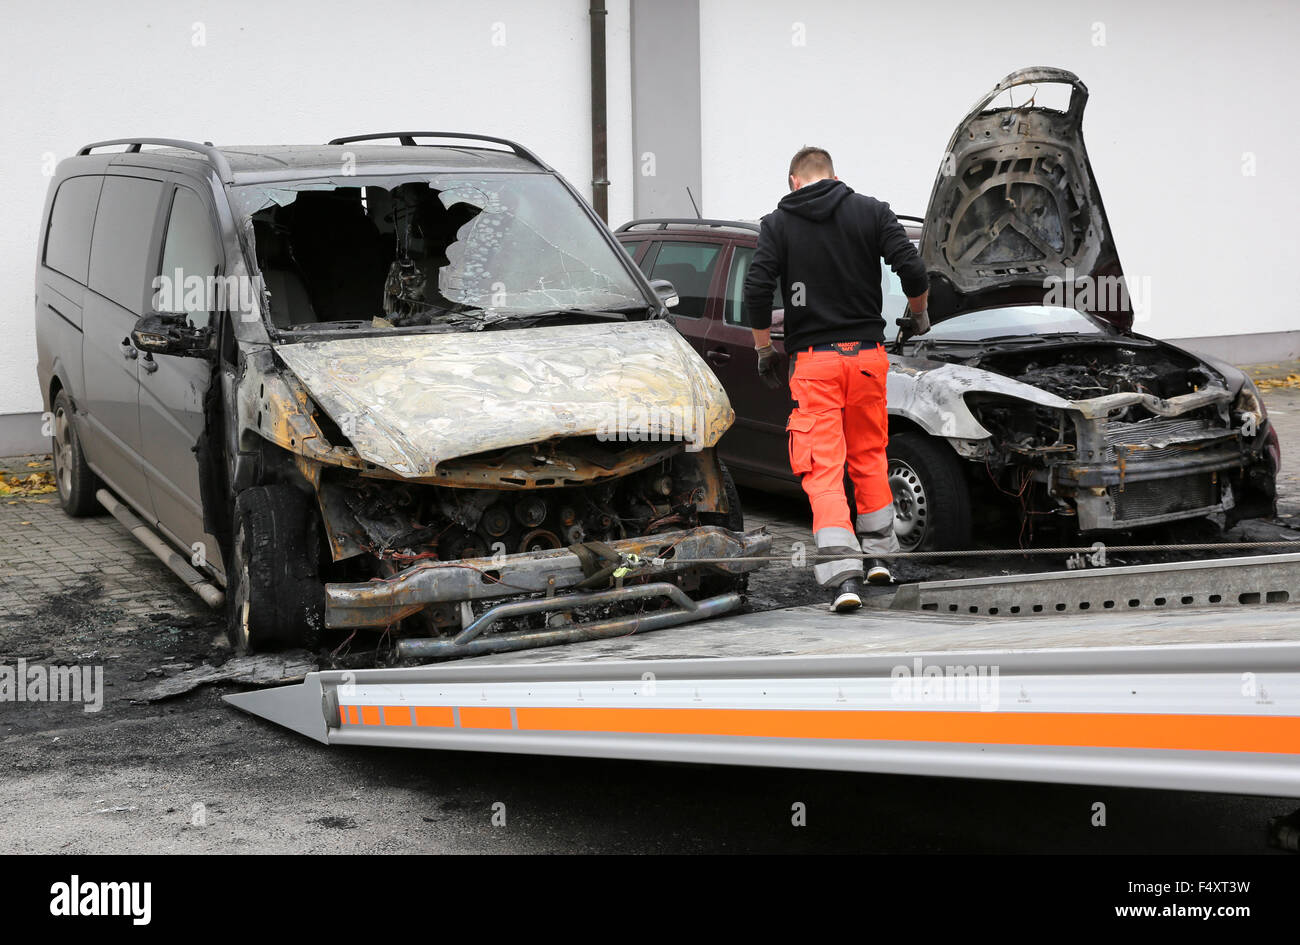 Stralsund, Germany. 24th Oct, 2015. Burnt-out cars can be seen in the parking lot of a shopping center in Stralsund, Germany, 24 October 2015. The cars were set on fire on the evening of 23 October 2015 during a demonstration against the federal government's refugee policy. The police are investigating for arson. Photo: BERND WUESTNECK/dpa/Alamy Live News Stock Photo